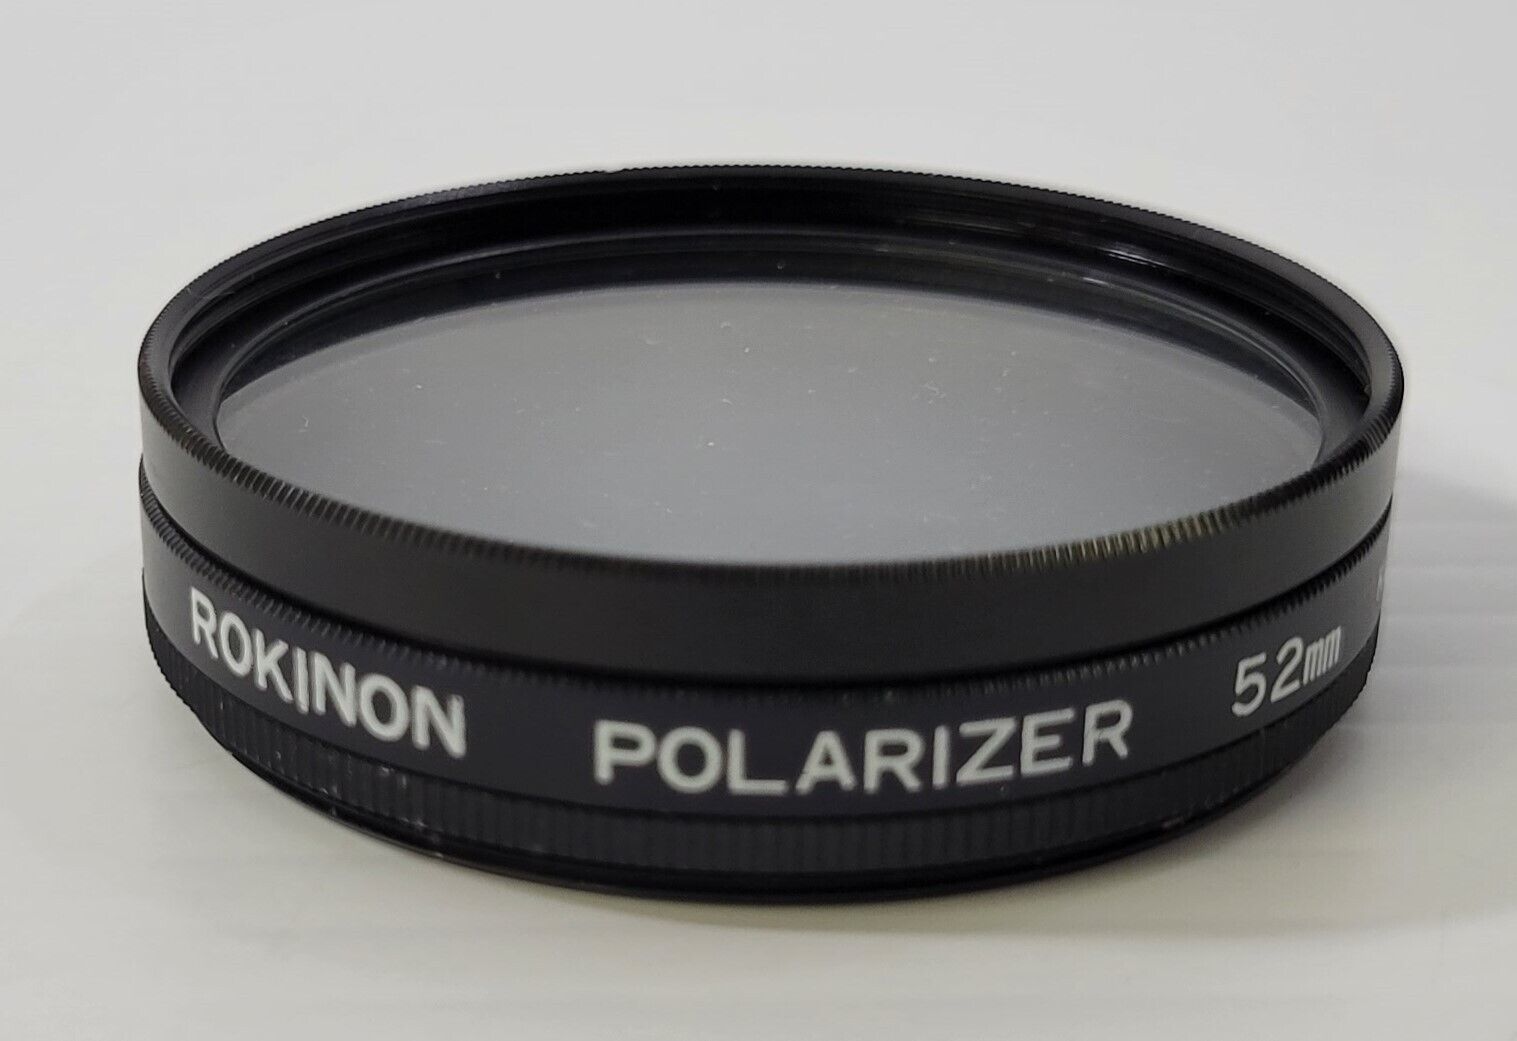 Primary image for PS) Rokinon Polarizer UV Circular Lens 52mm Photography Camera Accessory Part